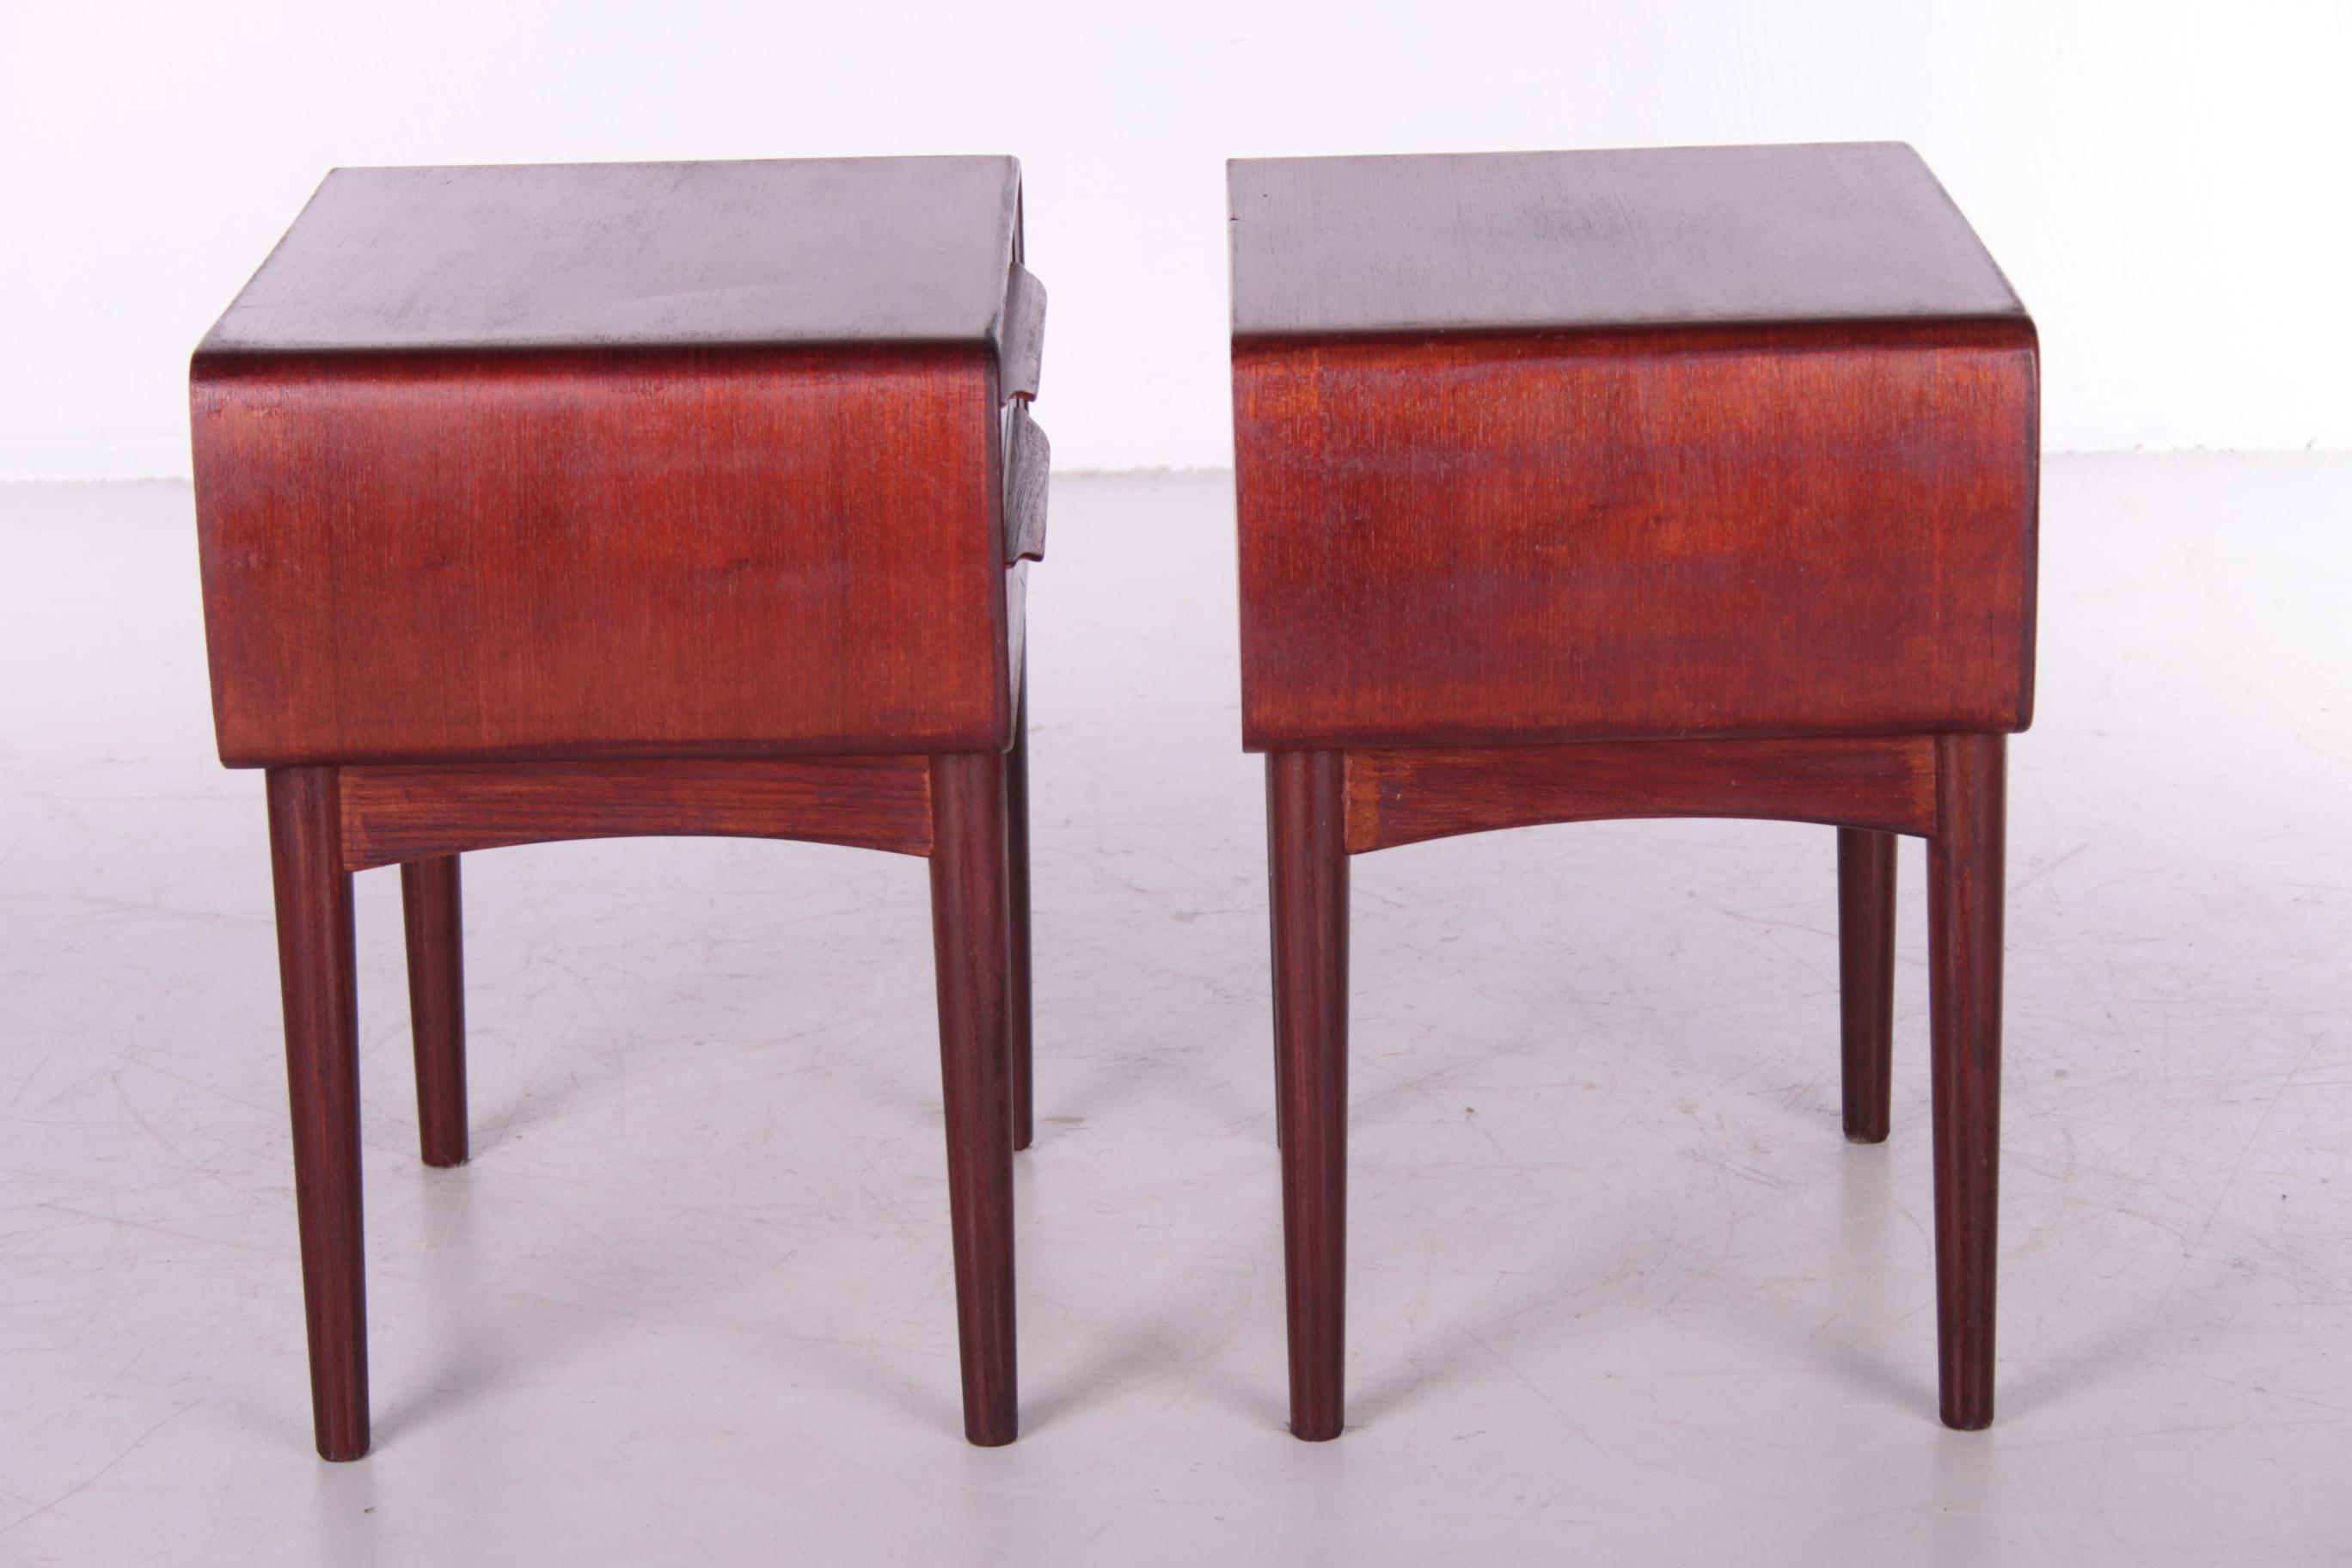 Mid-20th Century Set of Danish Design Bedside Tables Designed by Johannes Andersen by c.f.Silkebo For Sale